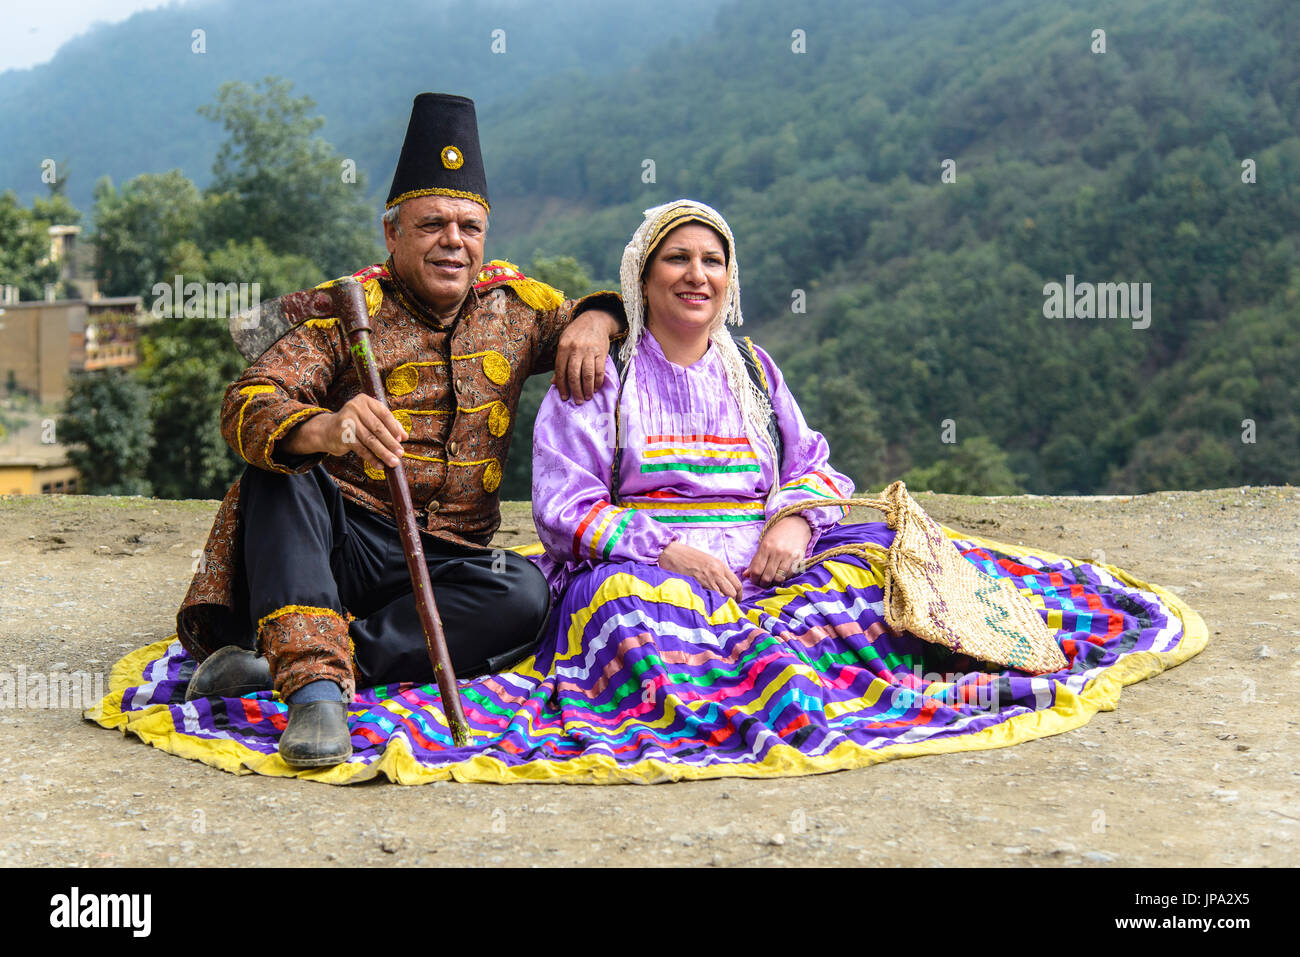 MASOULEH, IRAN - OCTOBER 05, 2014: Traditional celebrations during Eid al-Adha in the mountain village of Masouleh, Northern Iran Stock Photo